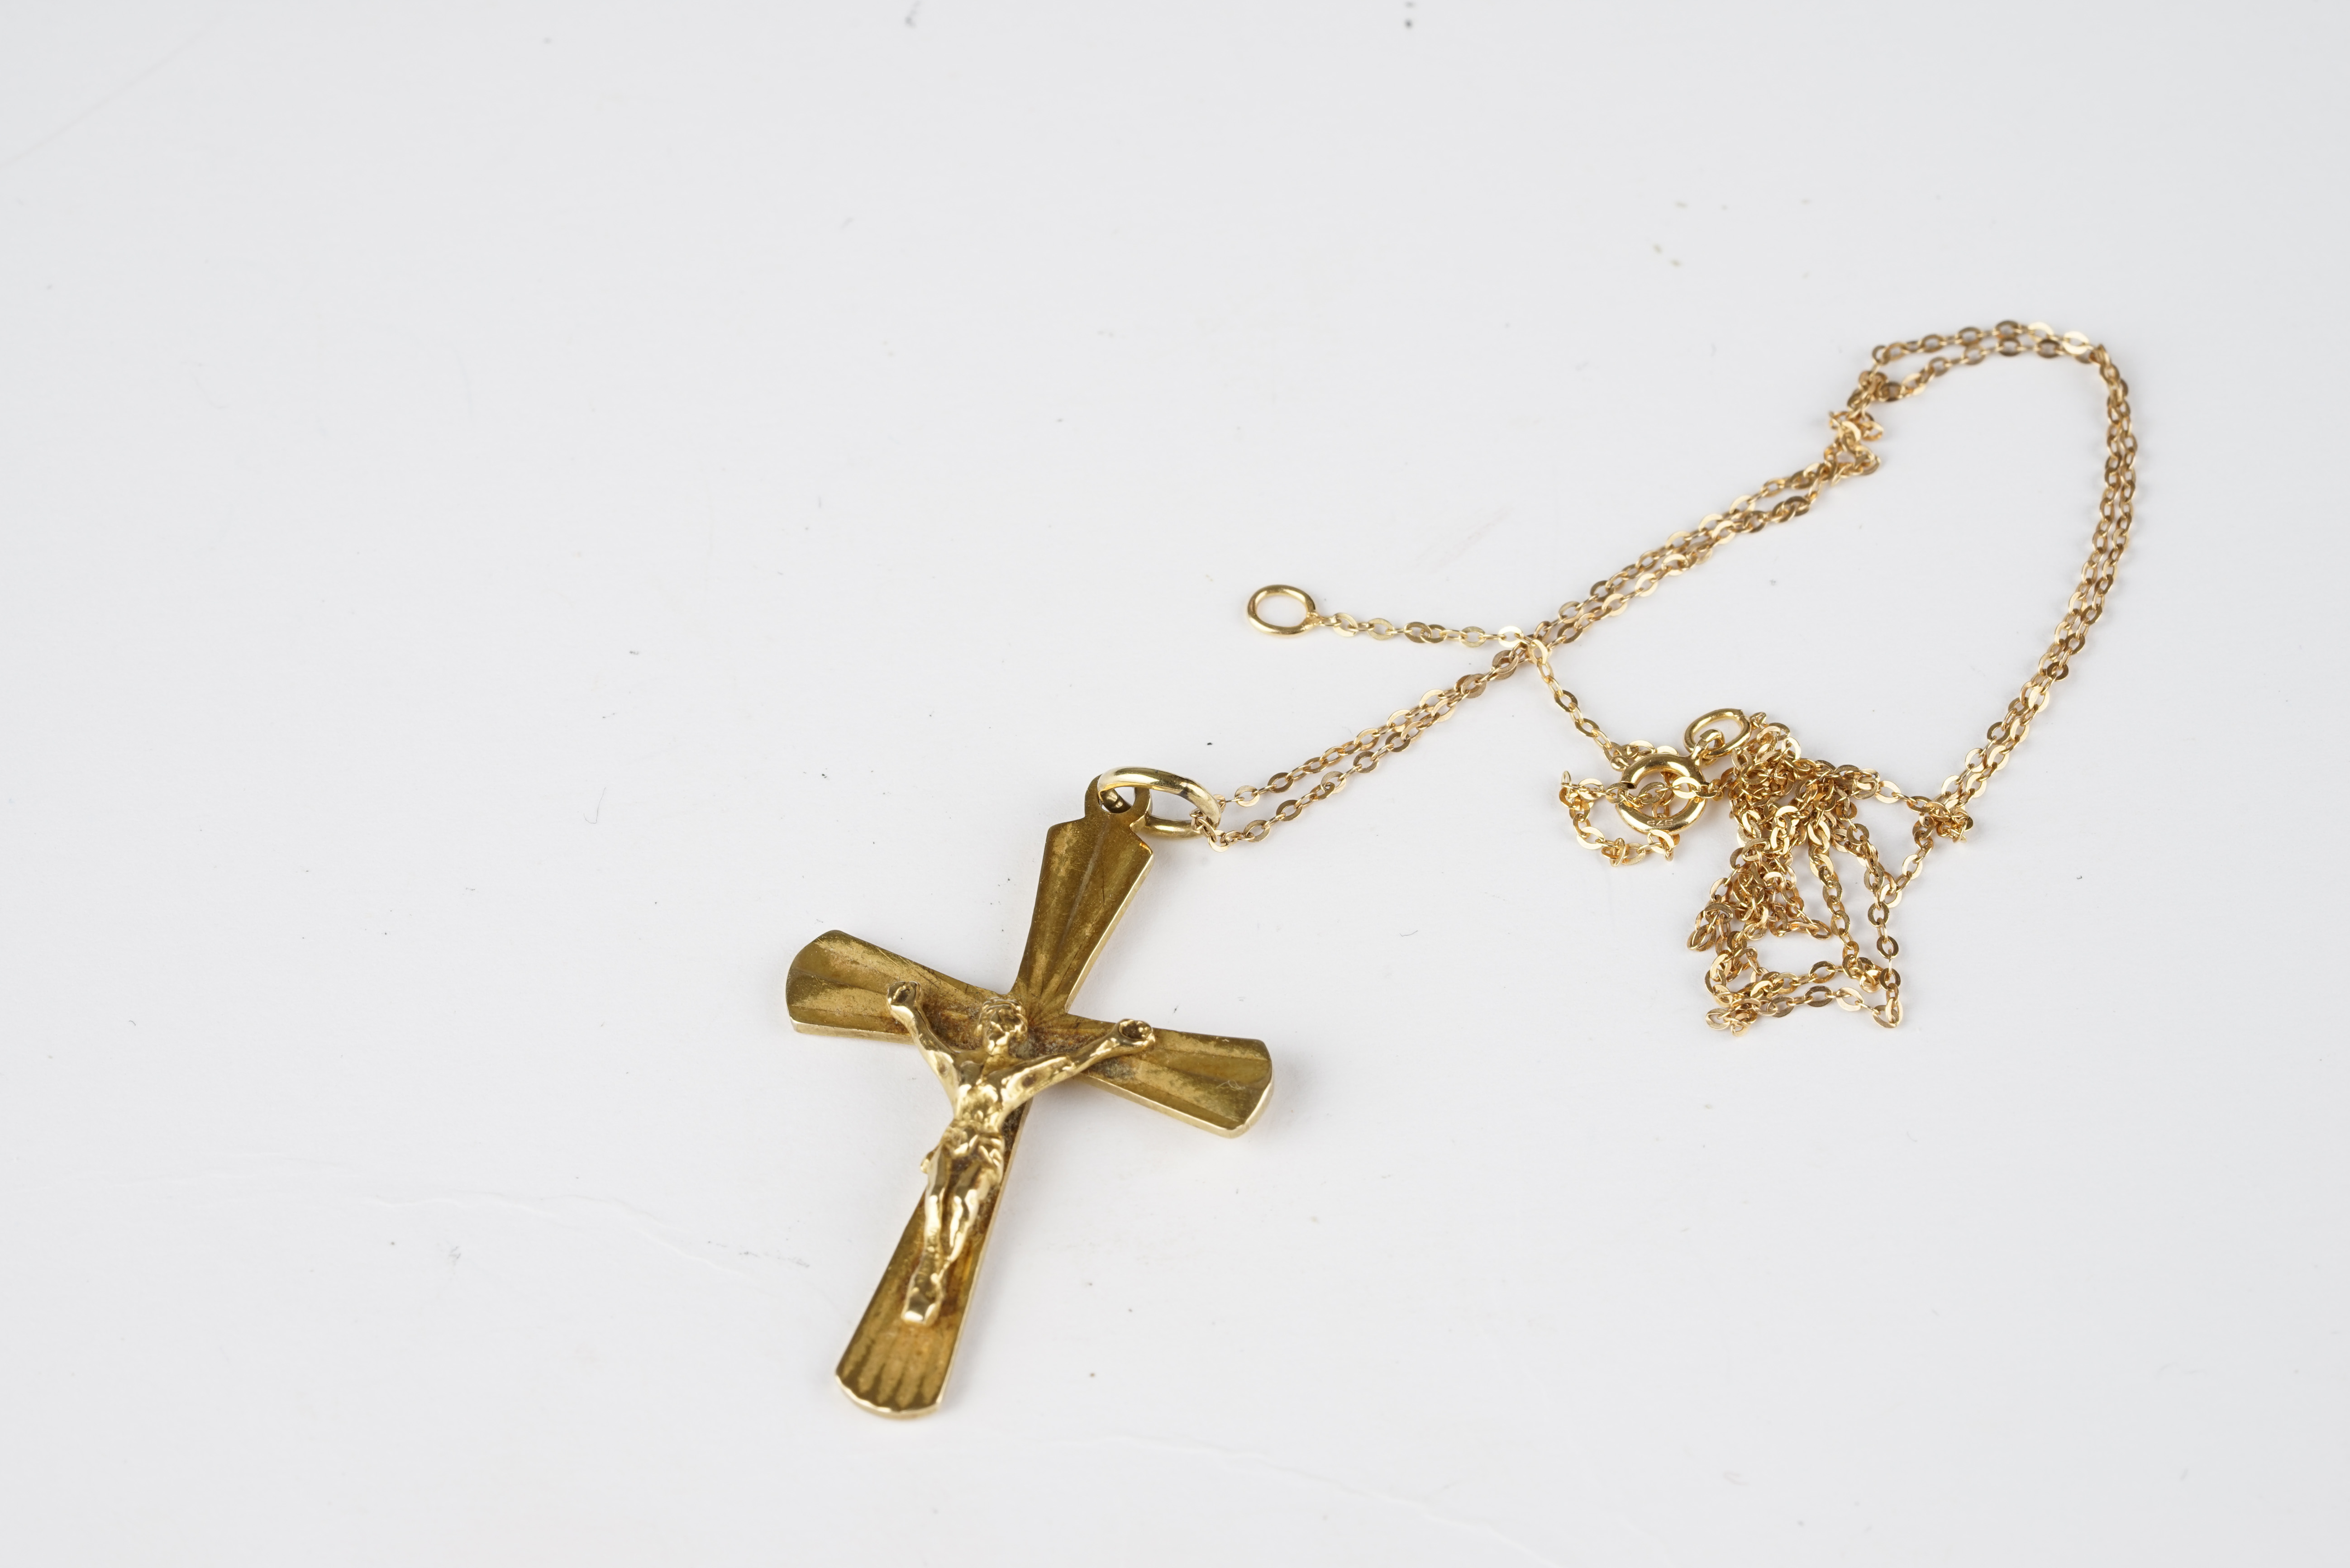 9CT GOLD CRUCIFIX CHAIN & PENDANT, gross weight is 3.52g.